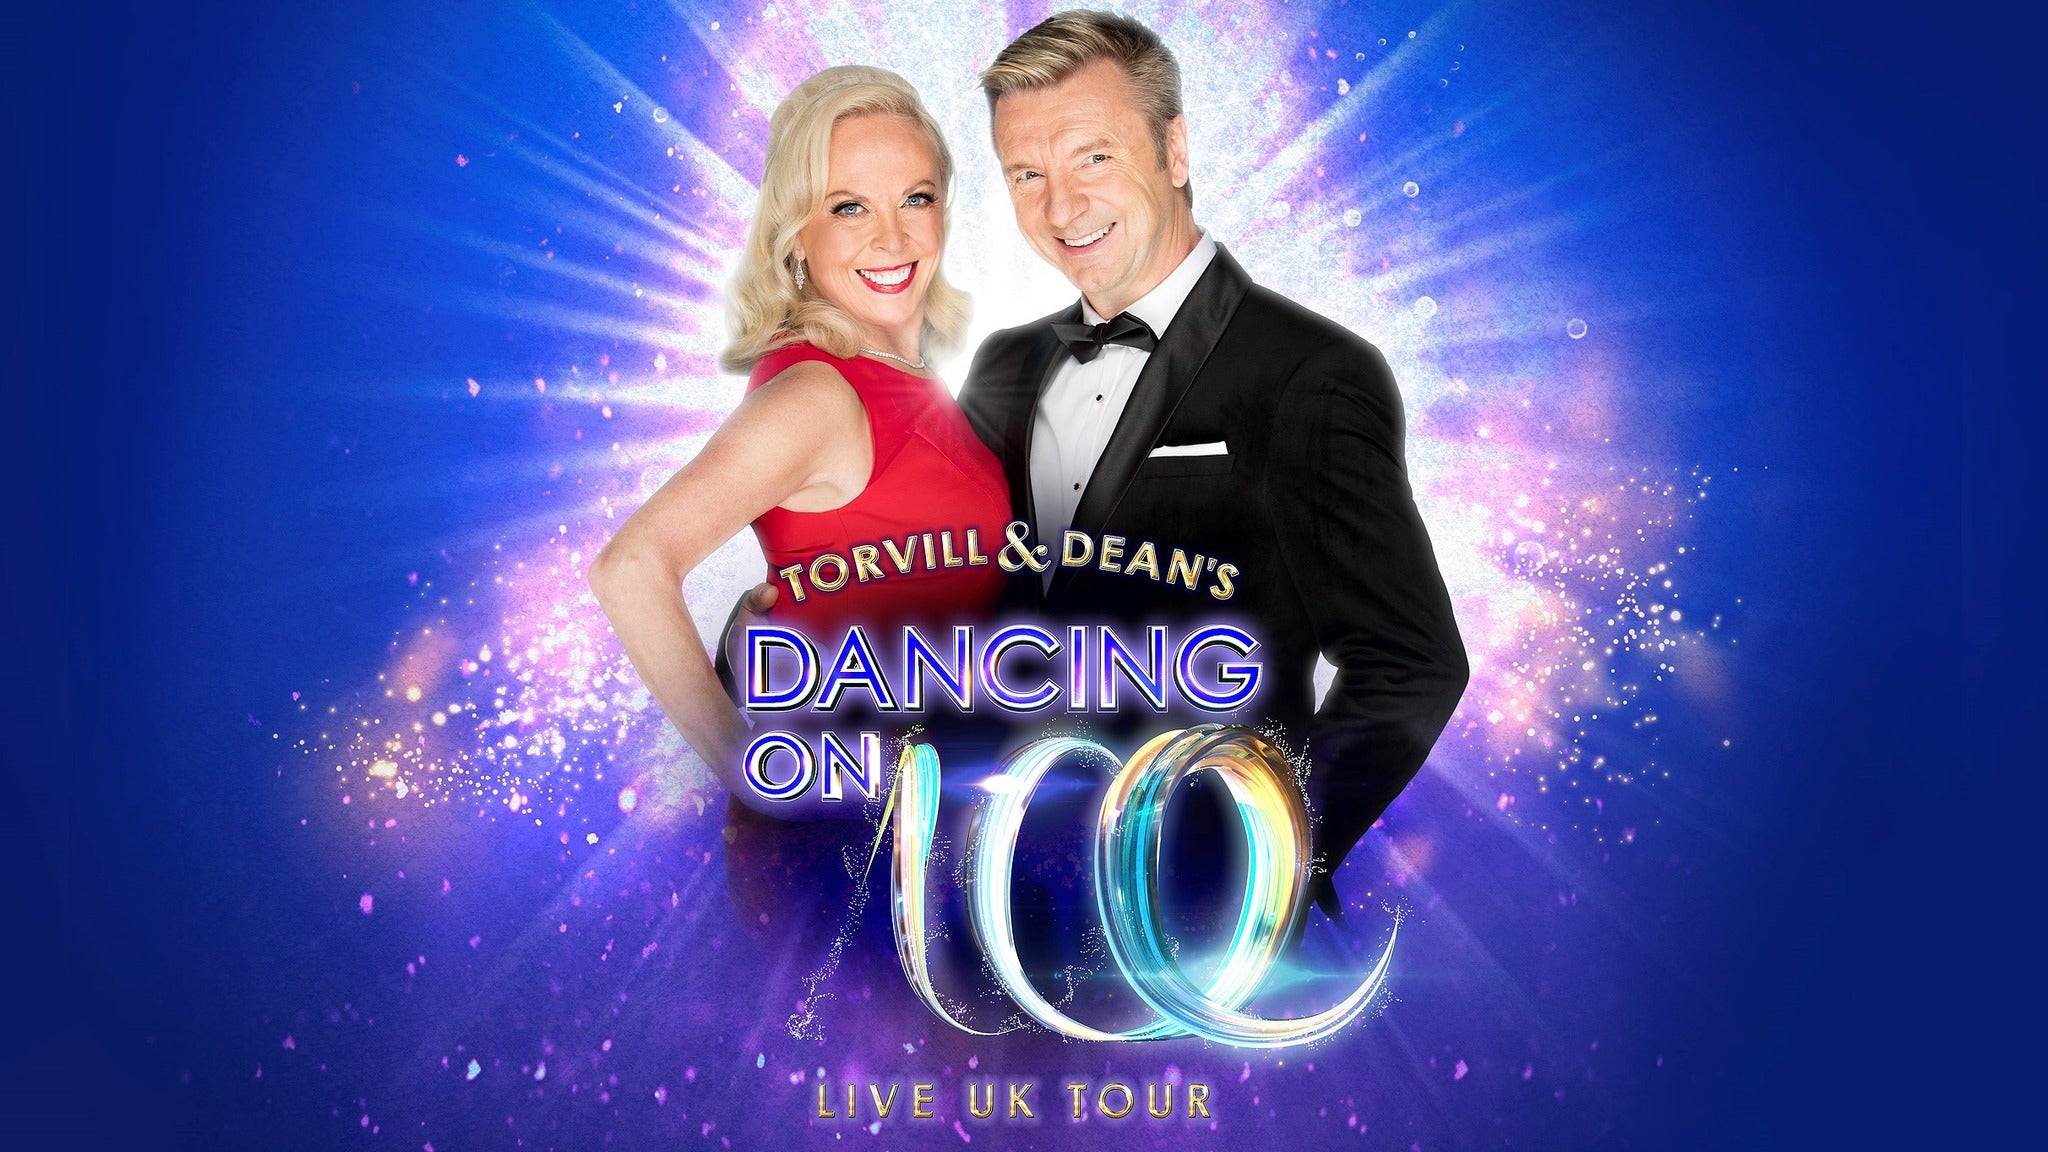 is dancing on ice going on tour